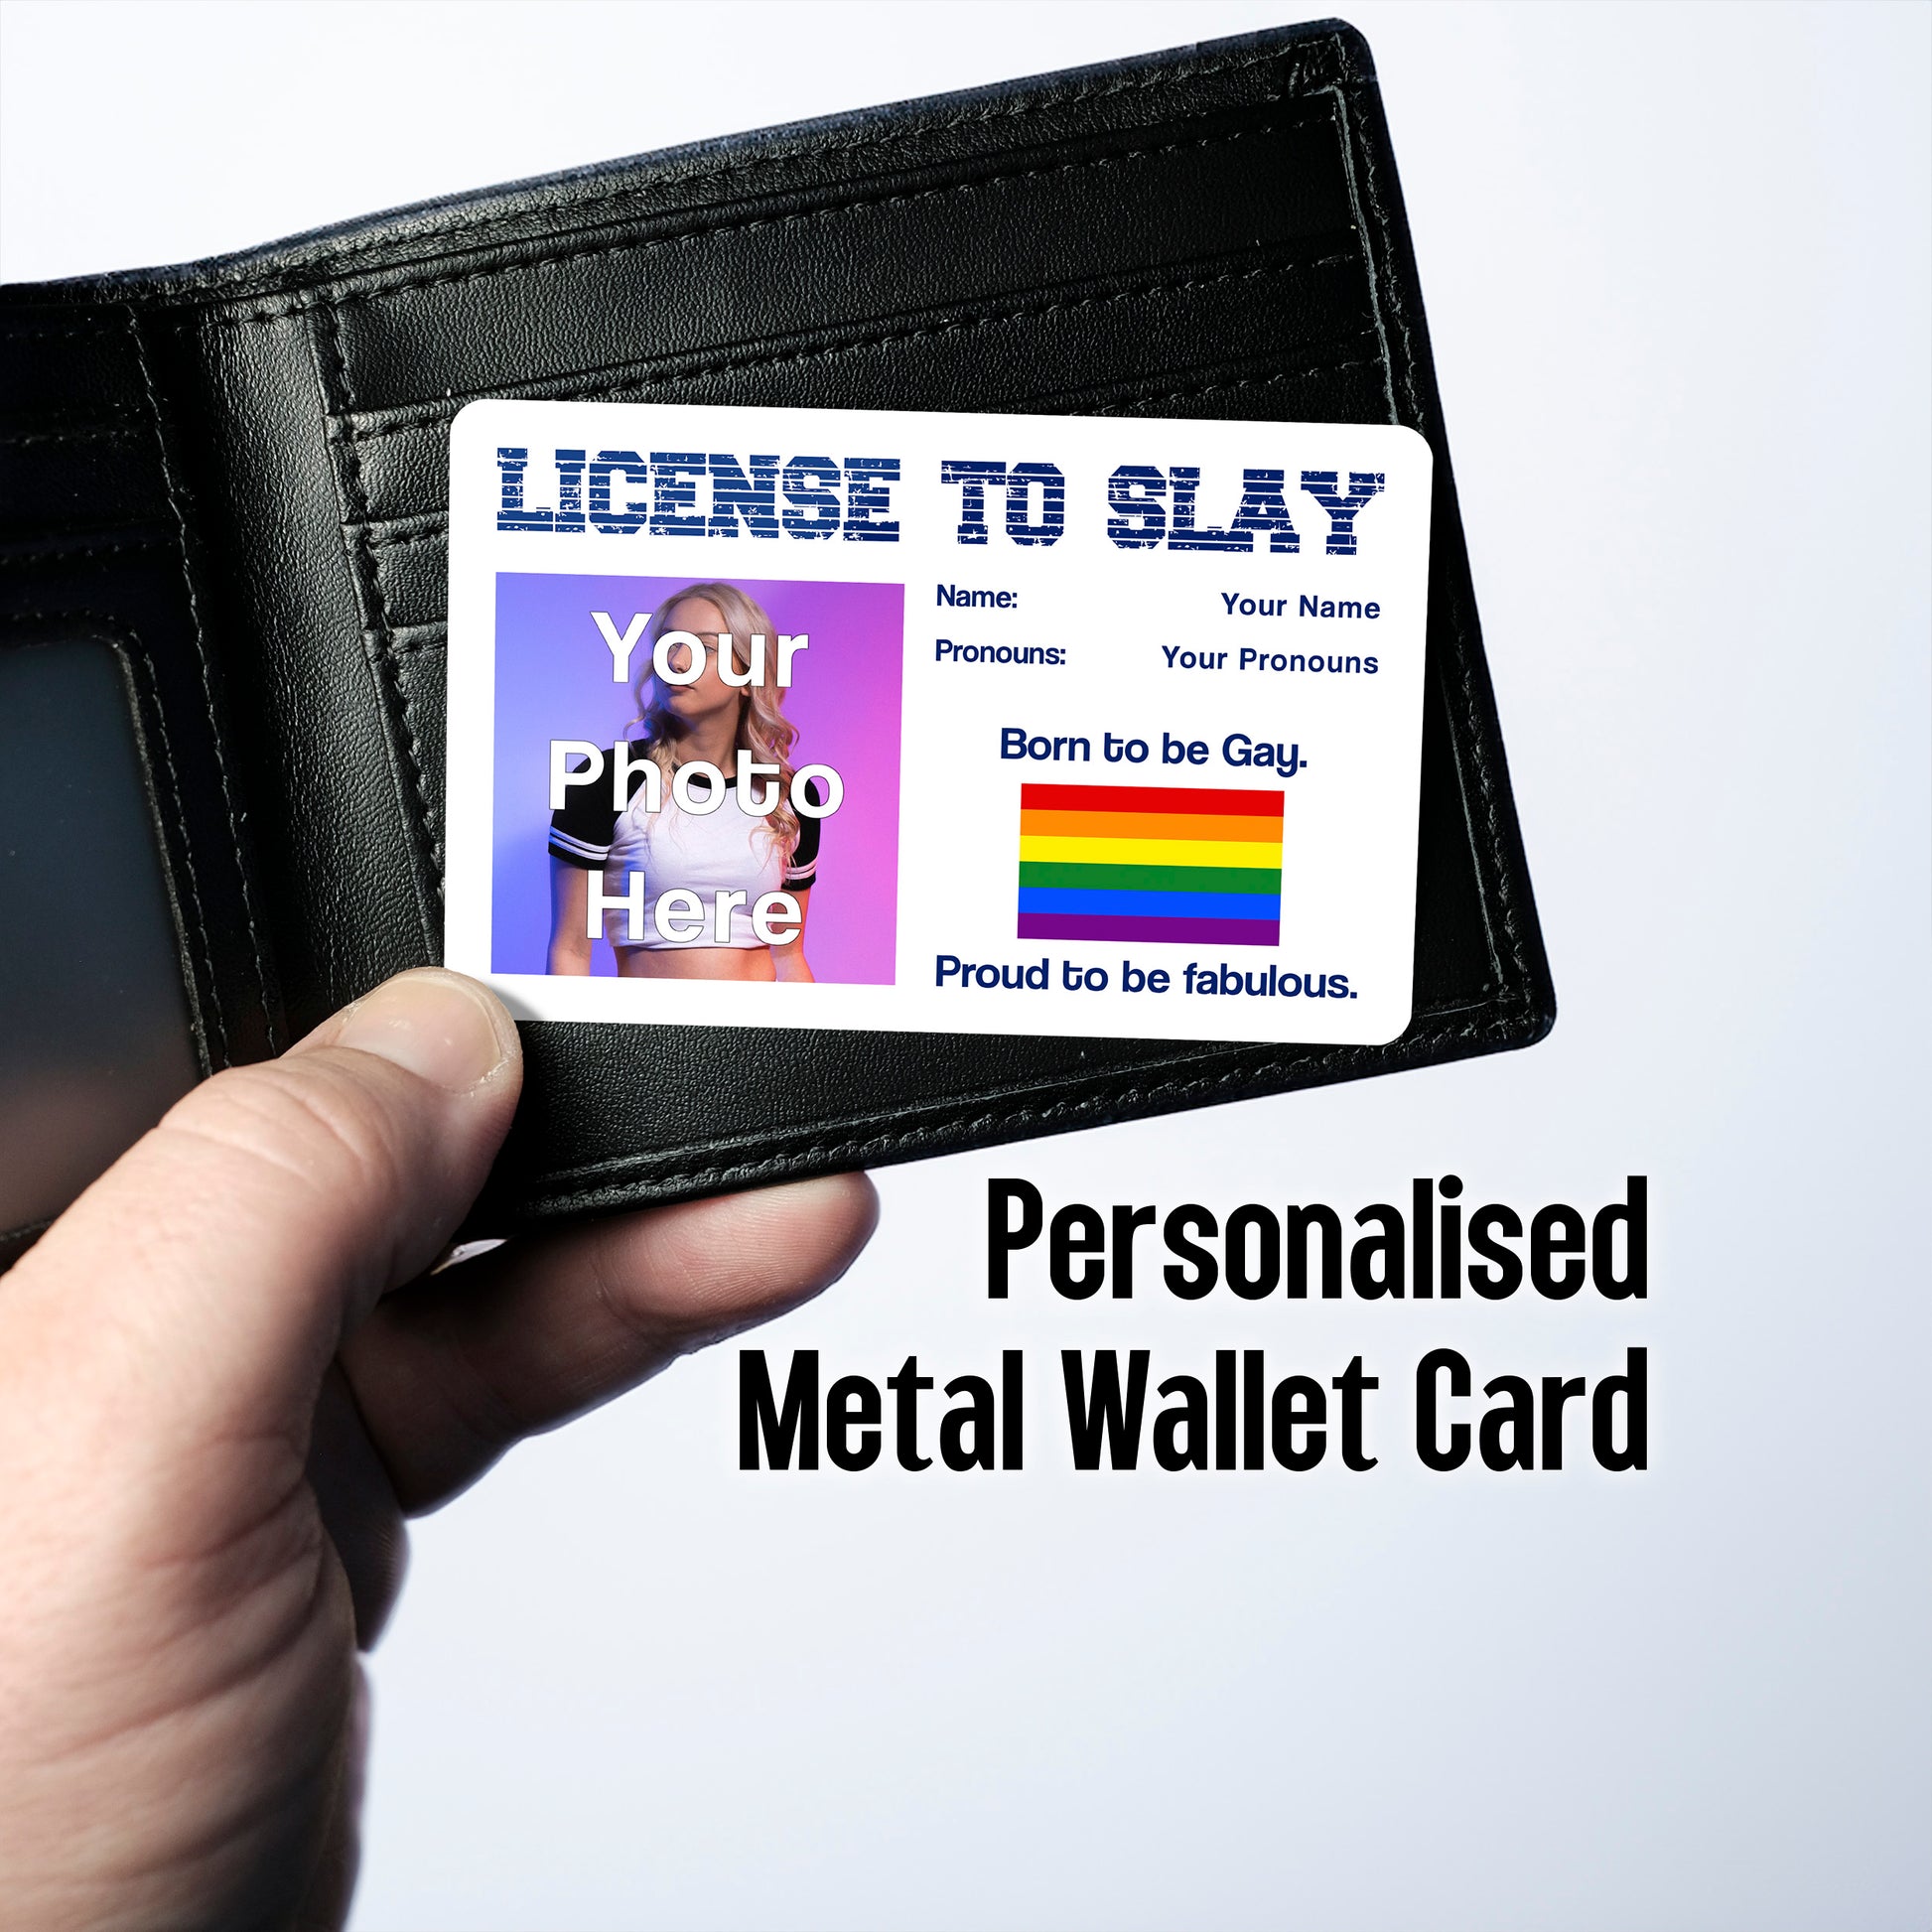 Aluminium novelty License To Slay wallet card personalised with your photo, name, pronouns, and the classic gay pride rainbow pride flag